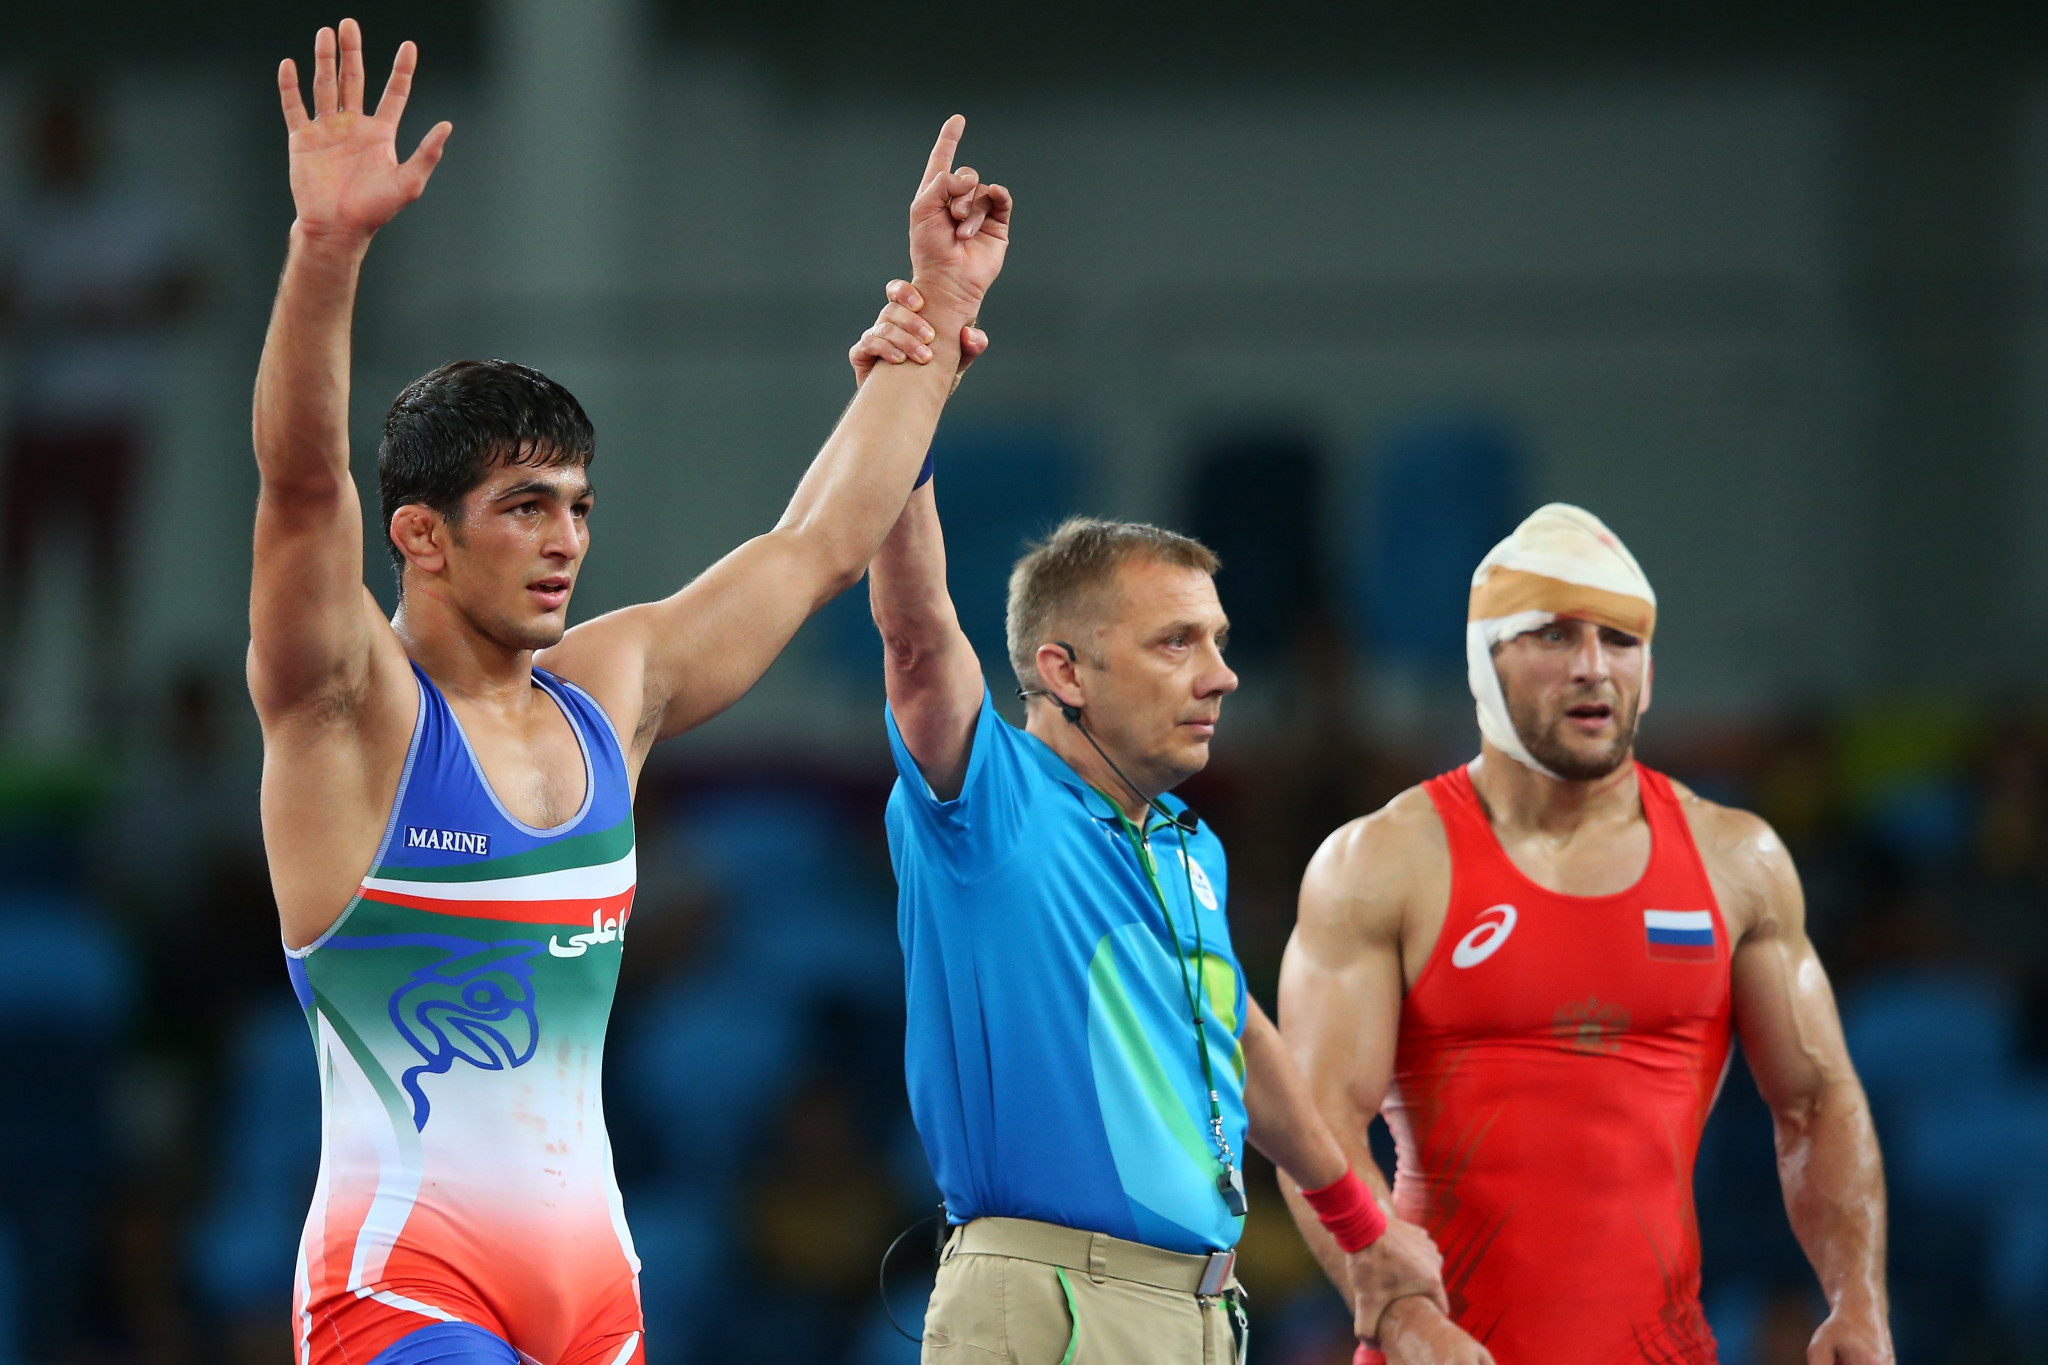 Olympic wrestling champion Yazdani aiming to compete at Paris 2024